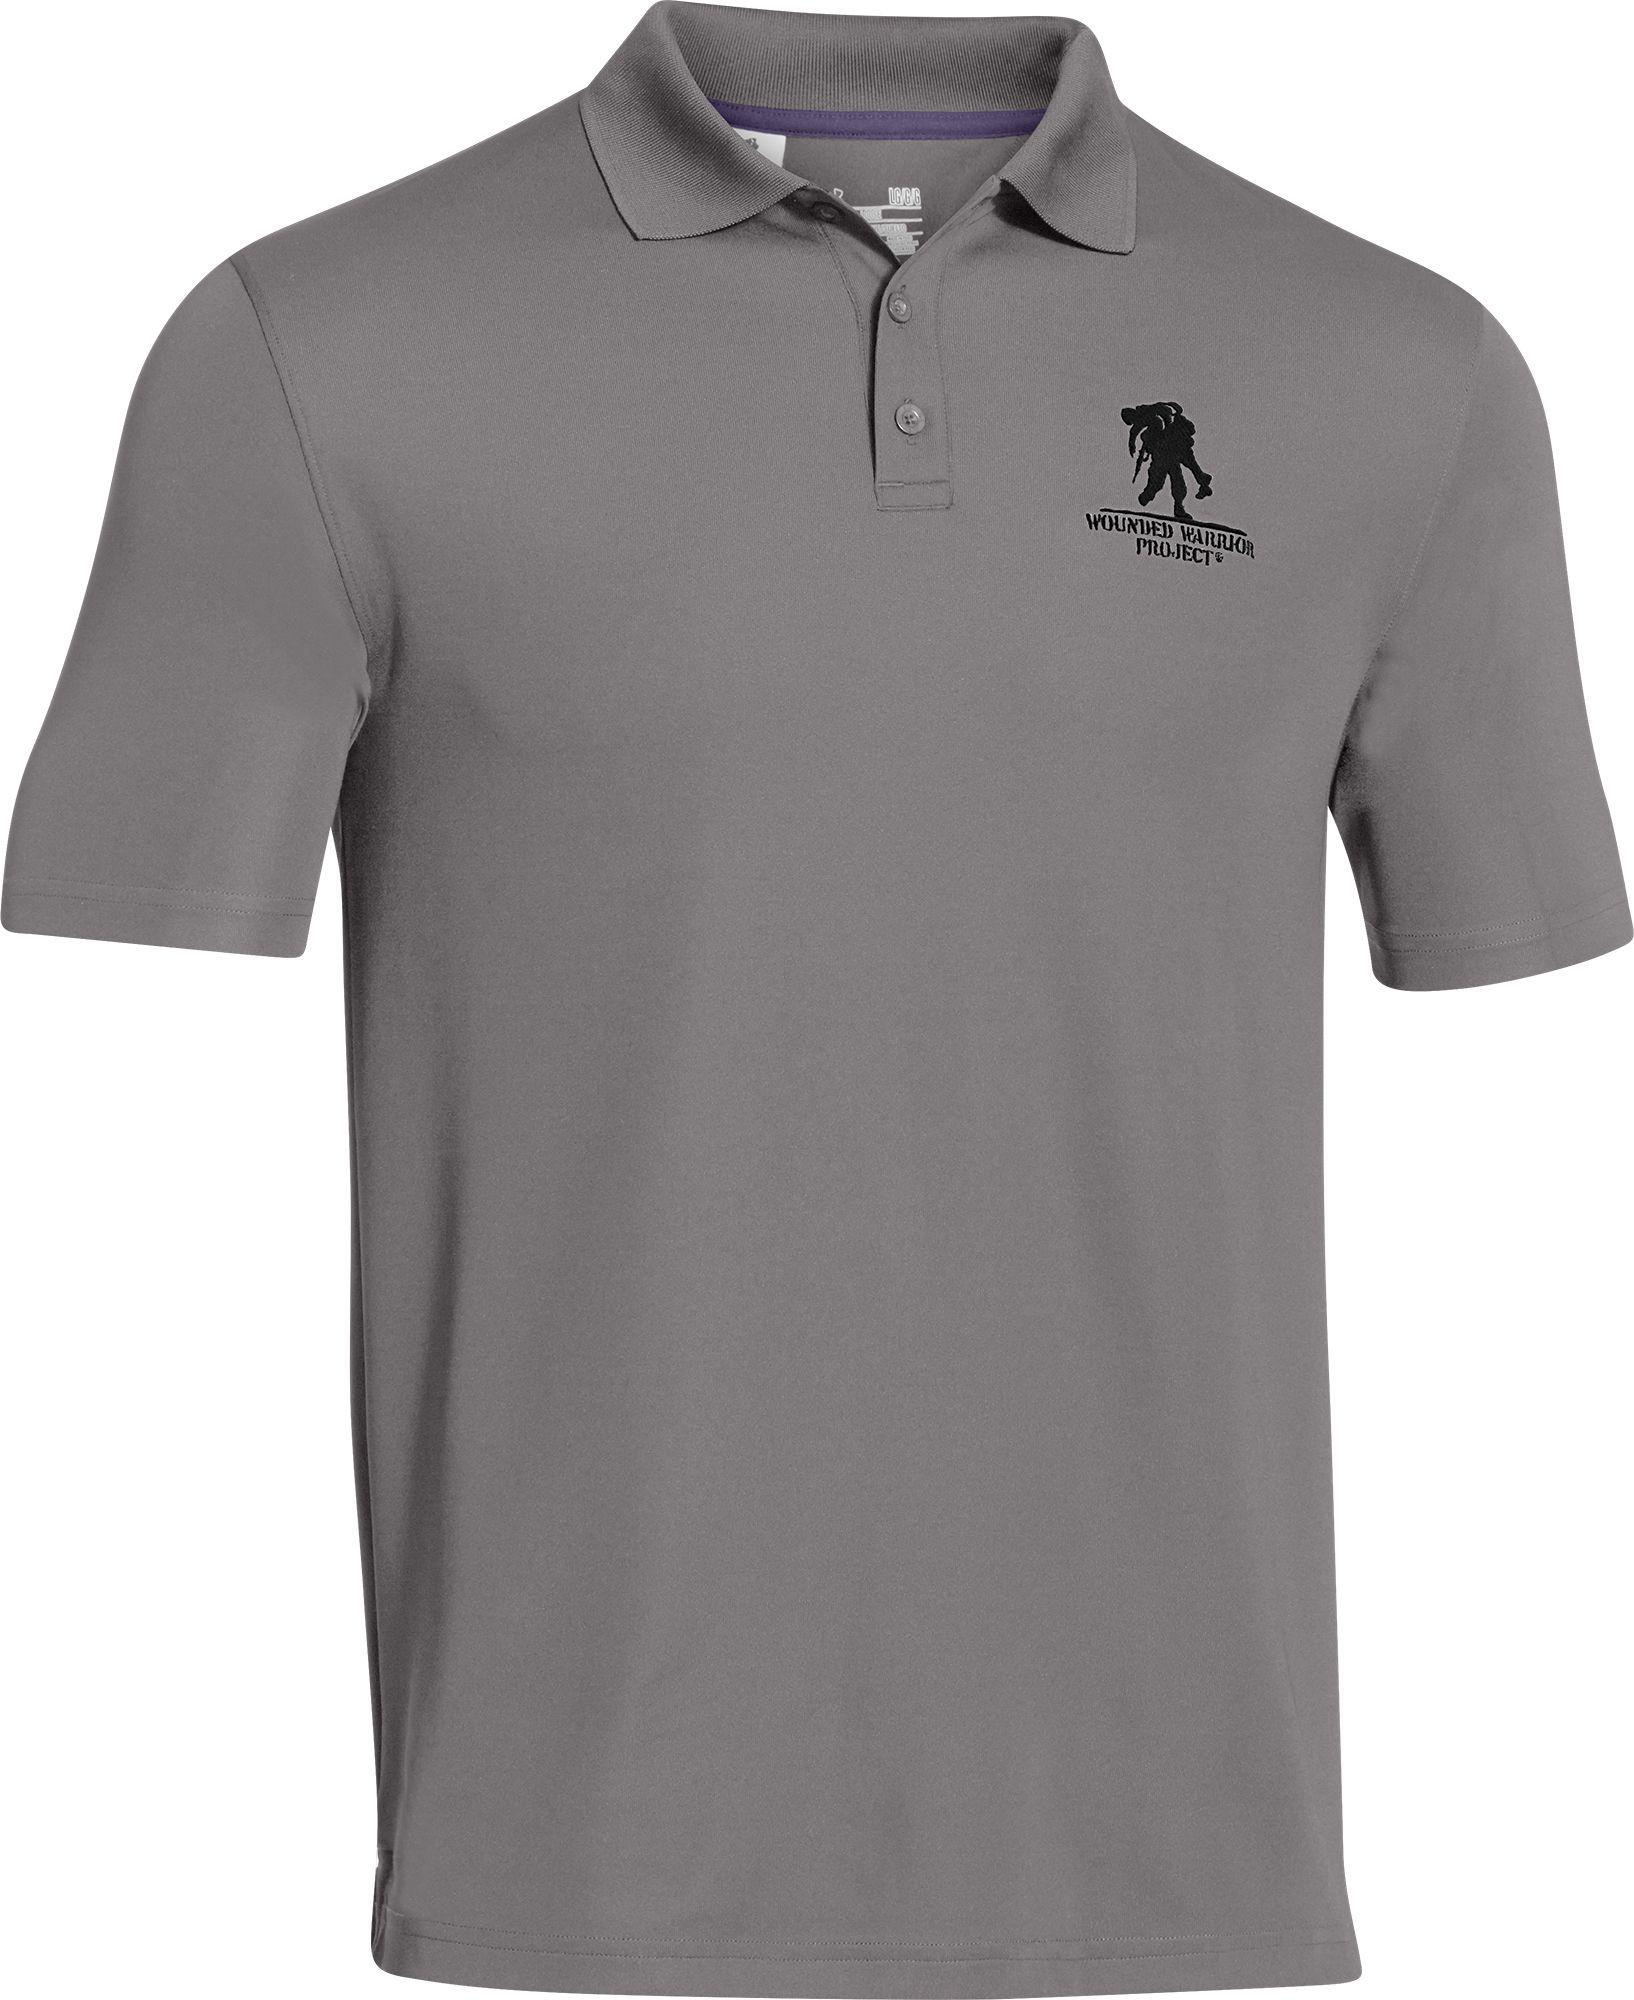 wounded warrior project polo shirts